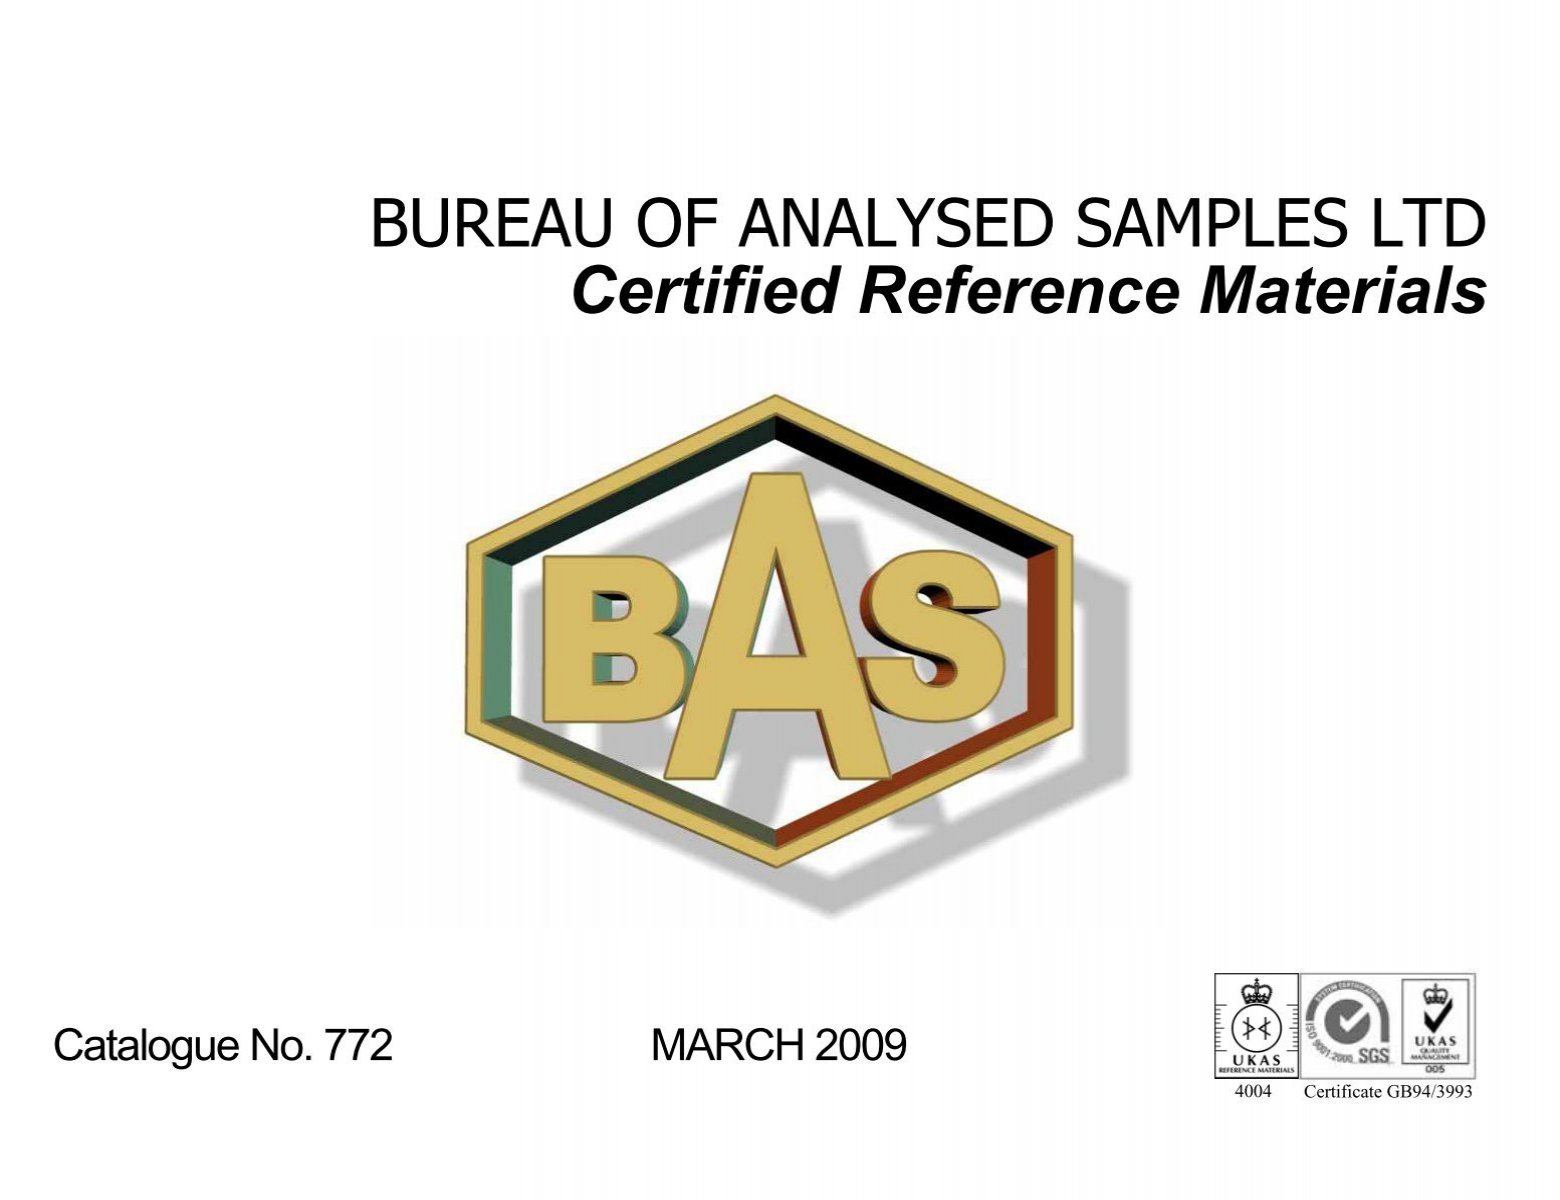 BUREAU OF ANALYSED SAMPLES LTD Certified Reference